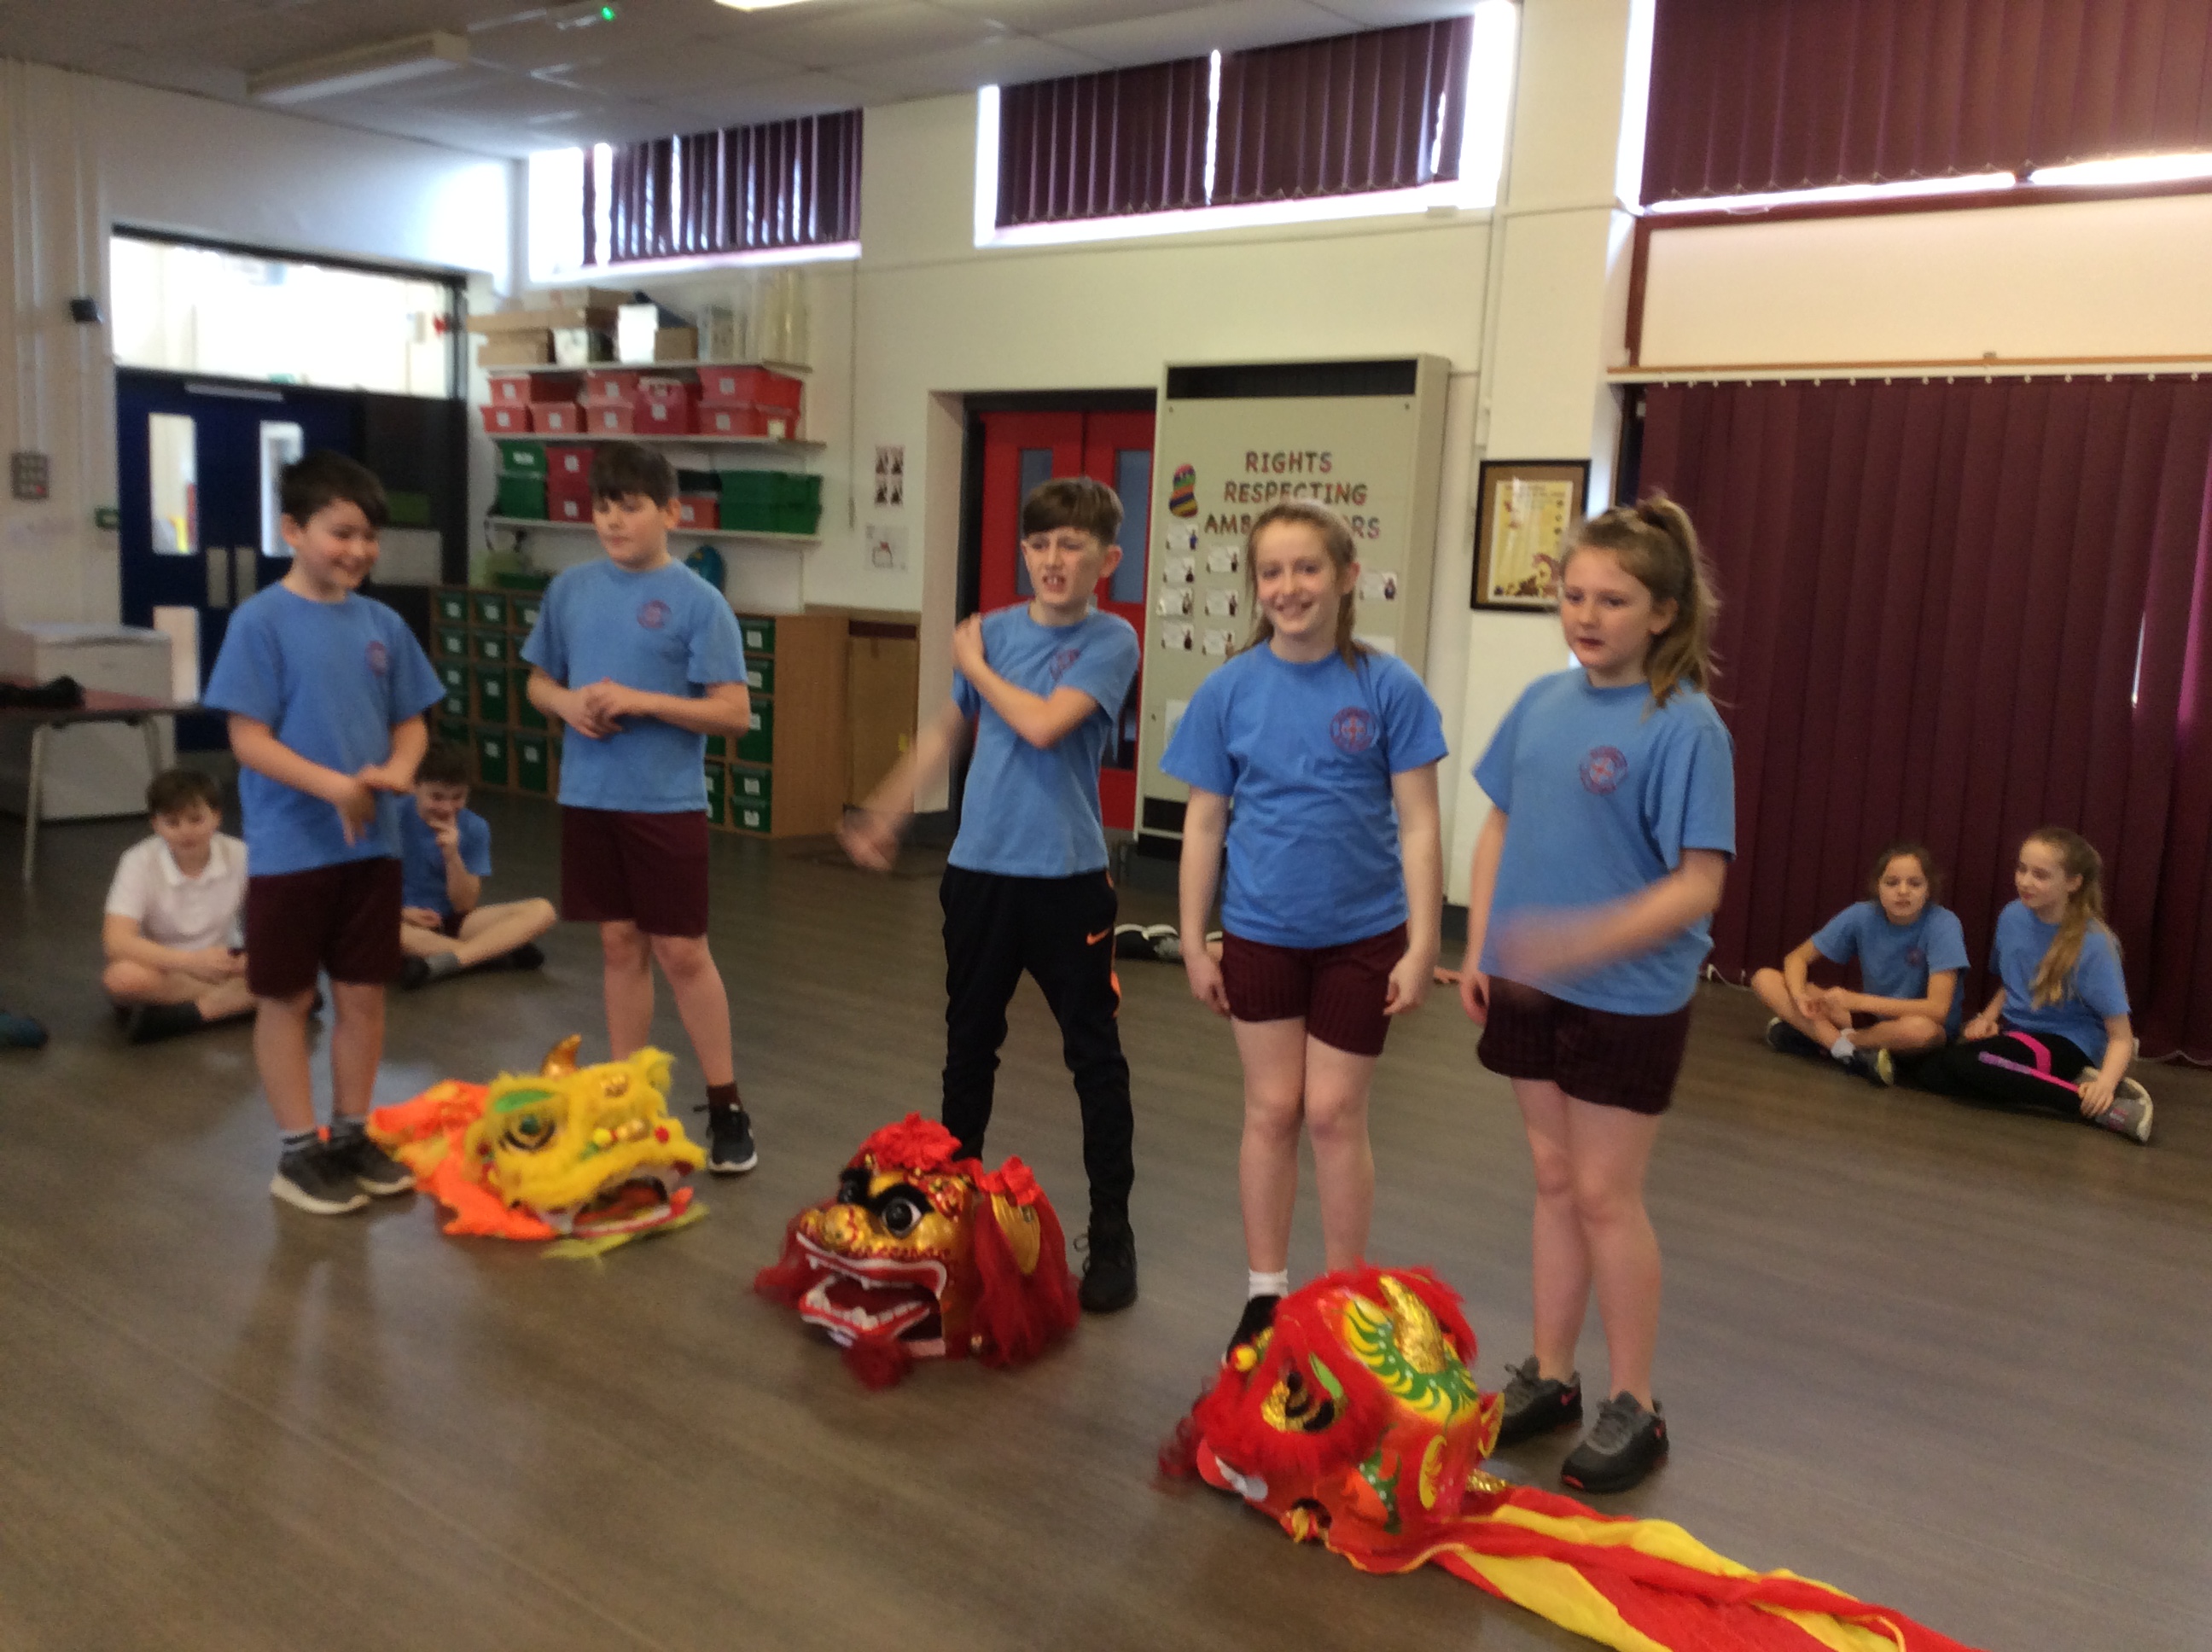 Chinese New Year: Lion Dancing – St. Cuthbert's Primary School2592 x 1936